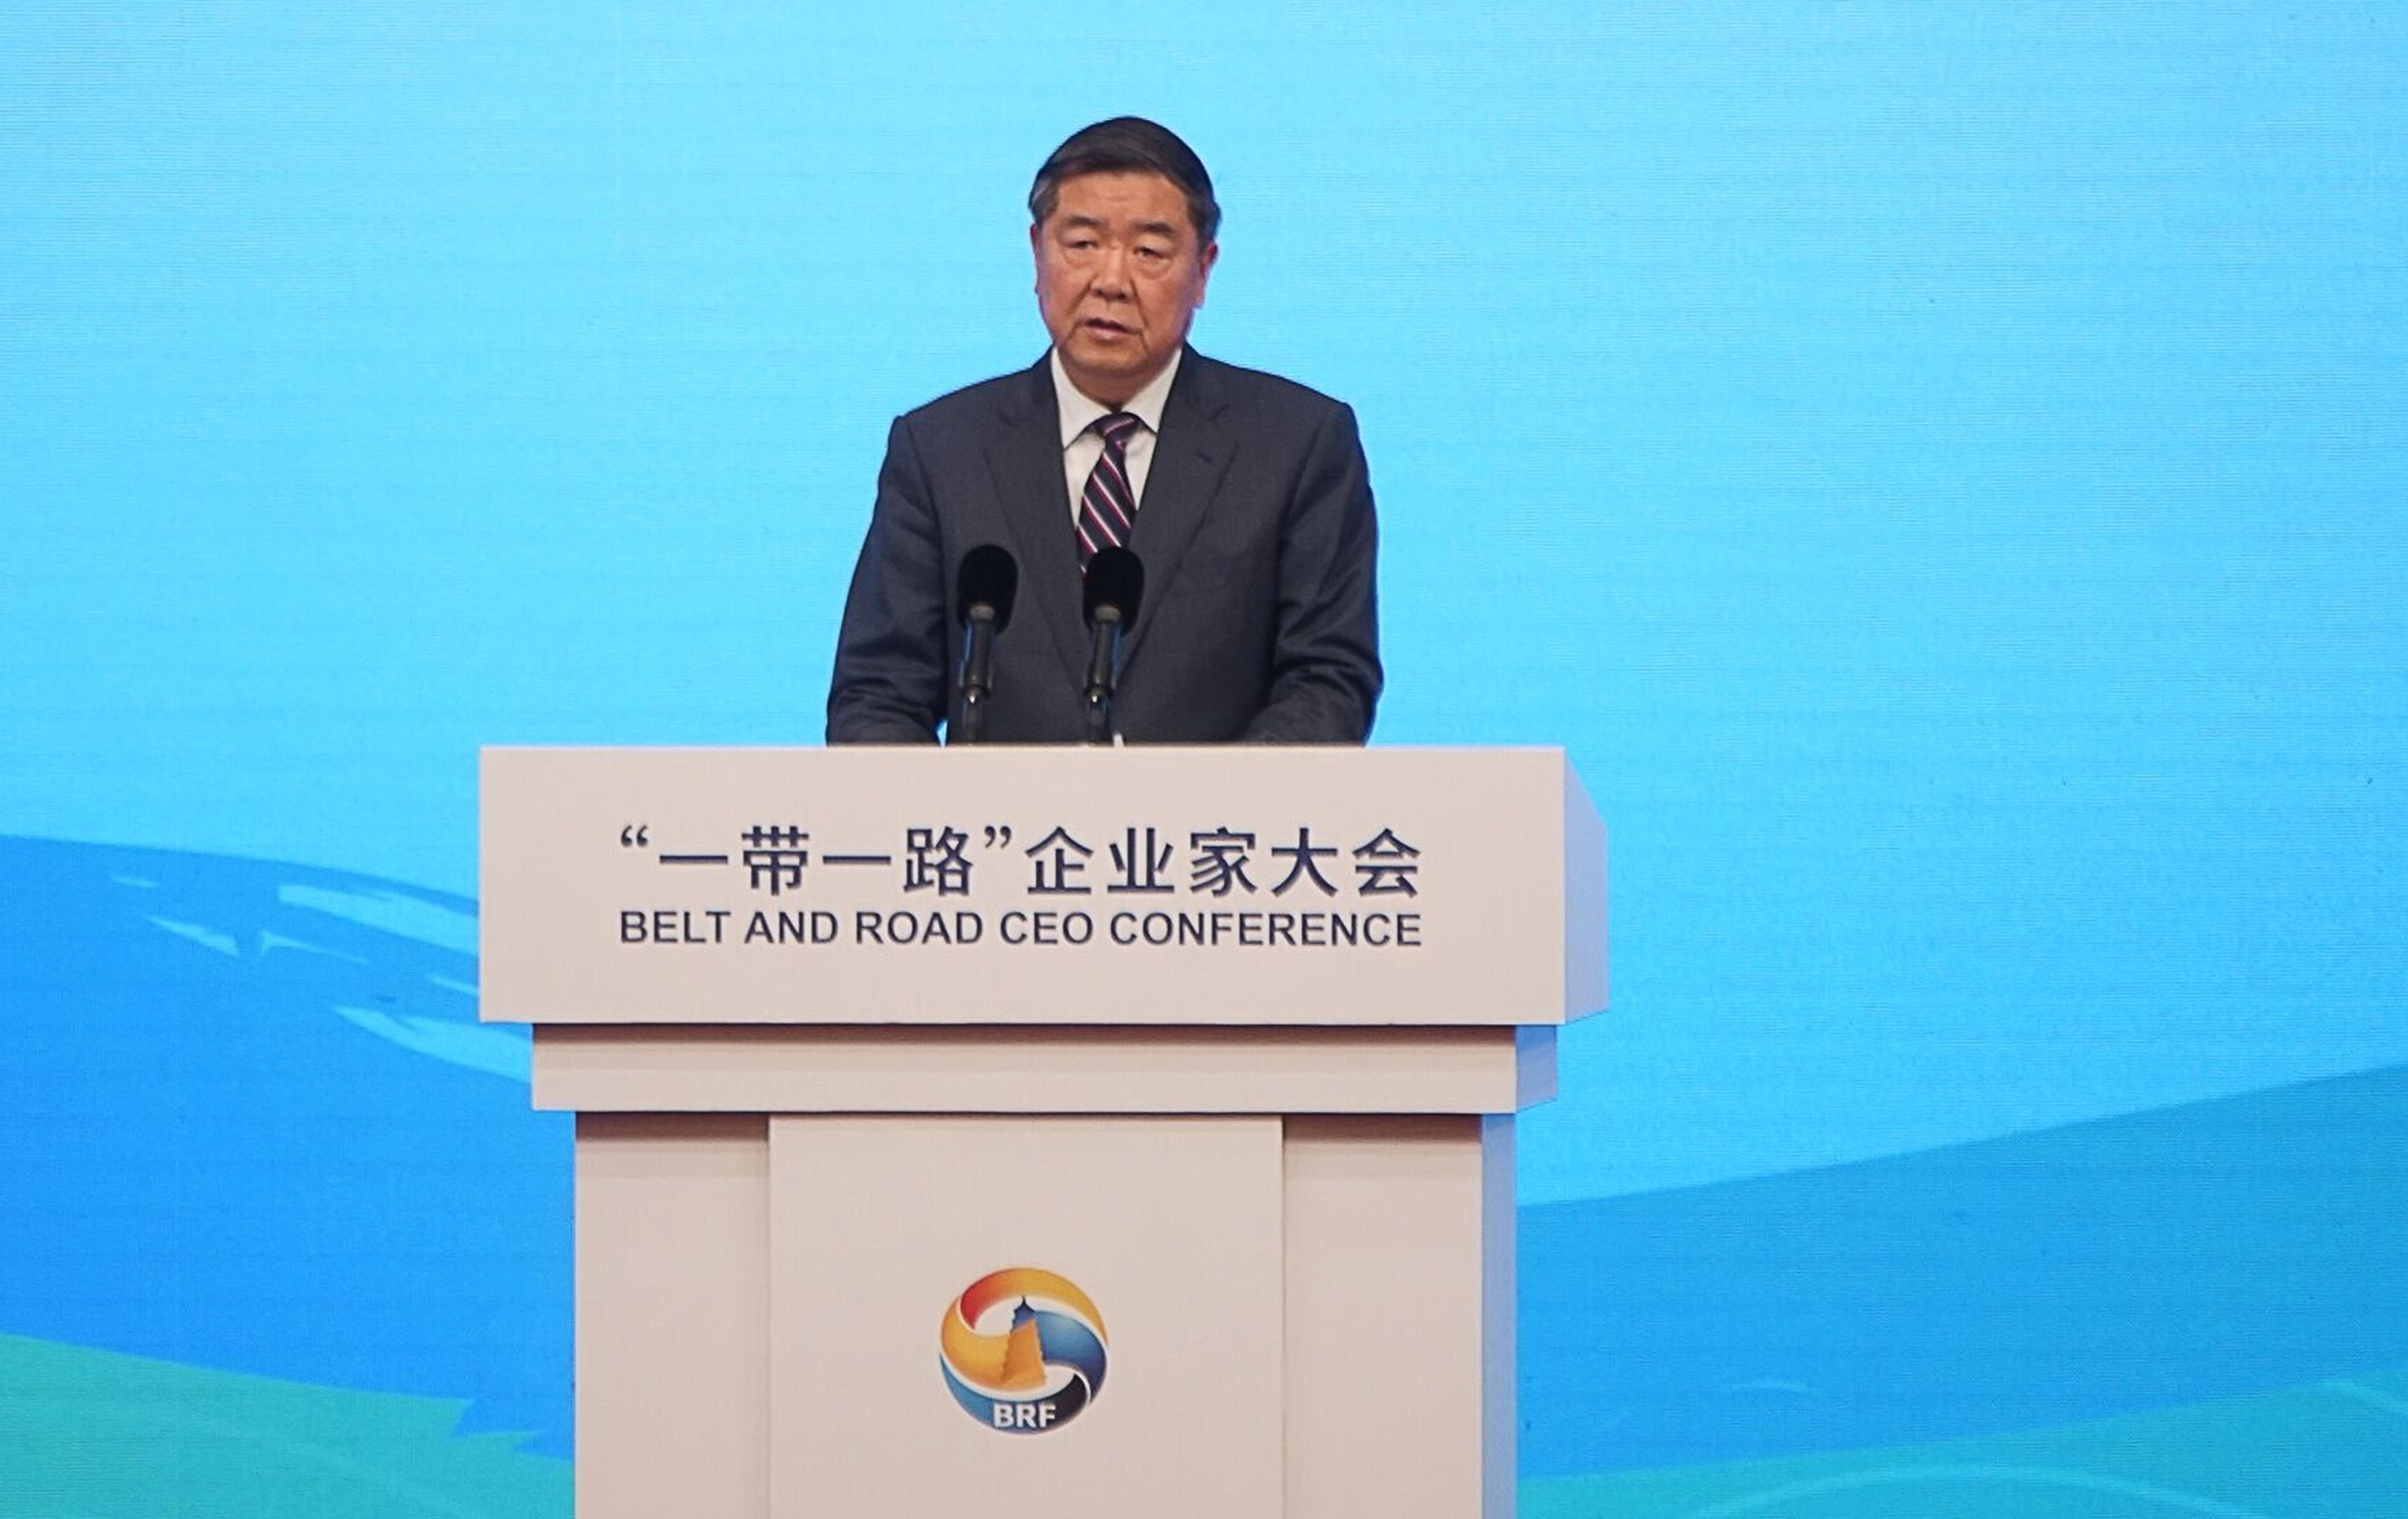 Vice-Premier He Lifeng talks about China’s Belt and Road Initiative at a conference in Beijing on Tuesday. Photo: Bloomberg